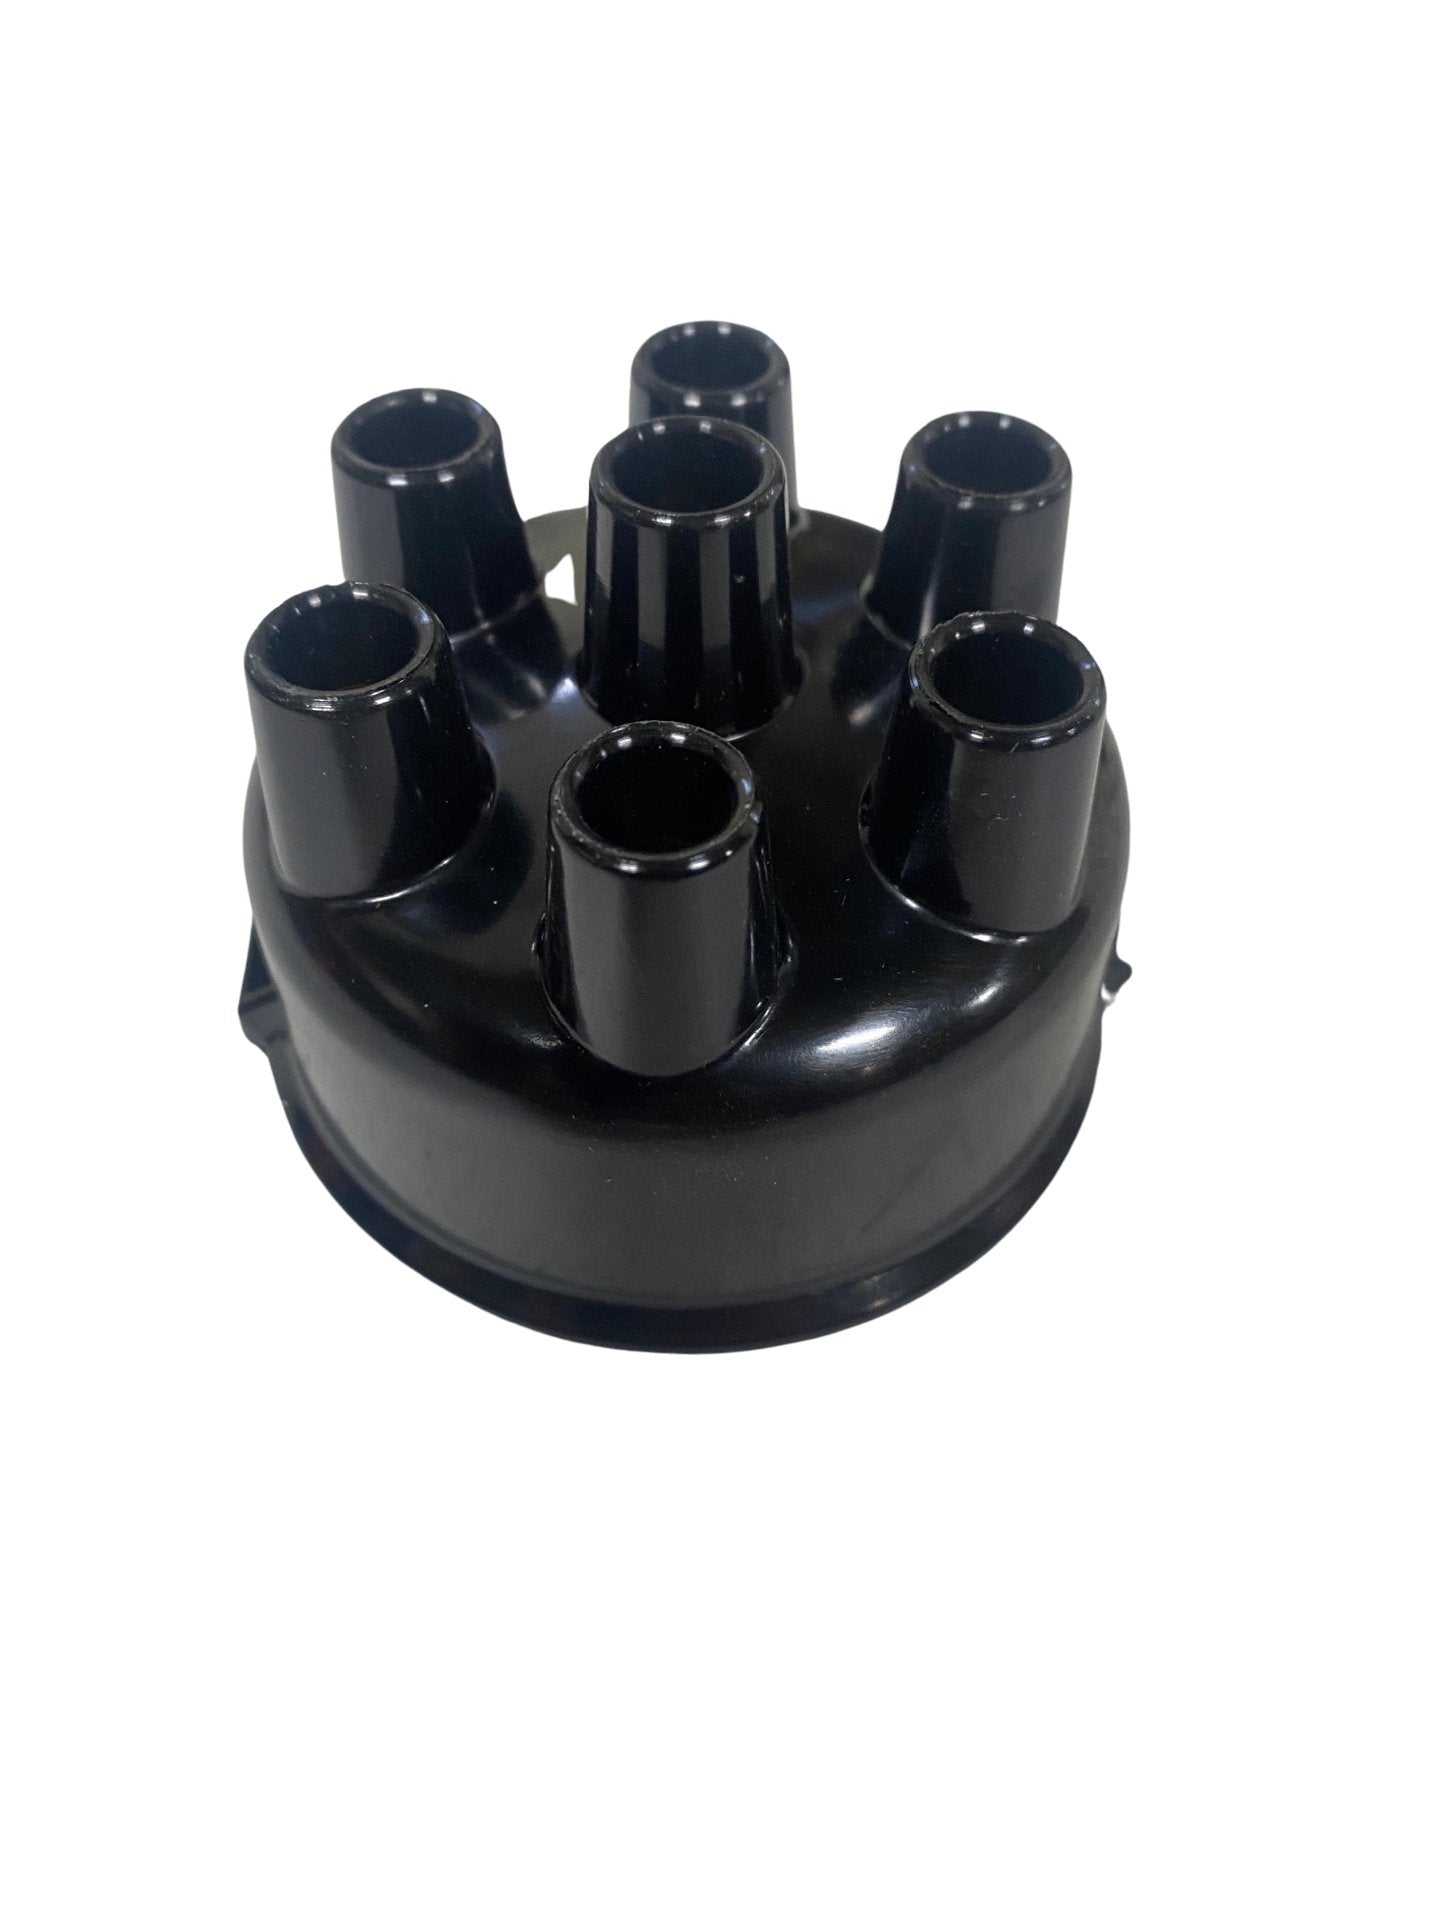 Distributor Cap, IAT-4007, 6-161 Engine, 1950-1955, Willys Jeepster and Station Wagon - The JeepsterMan